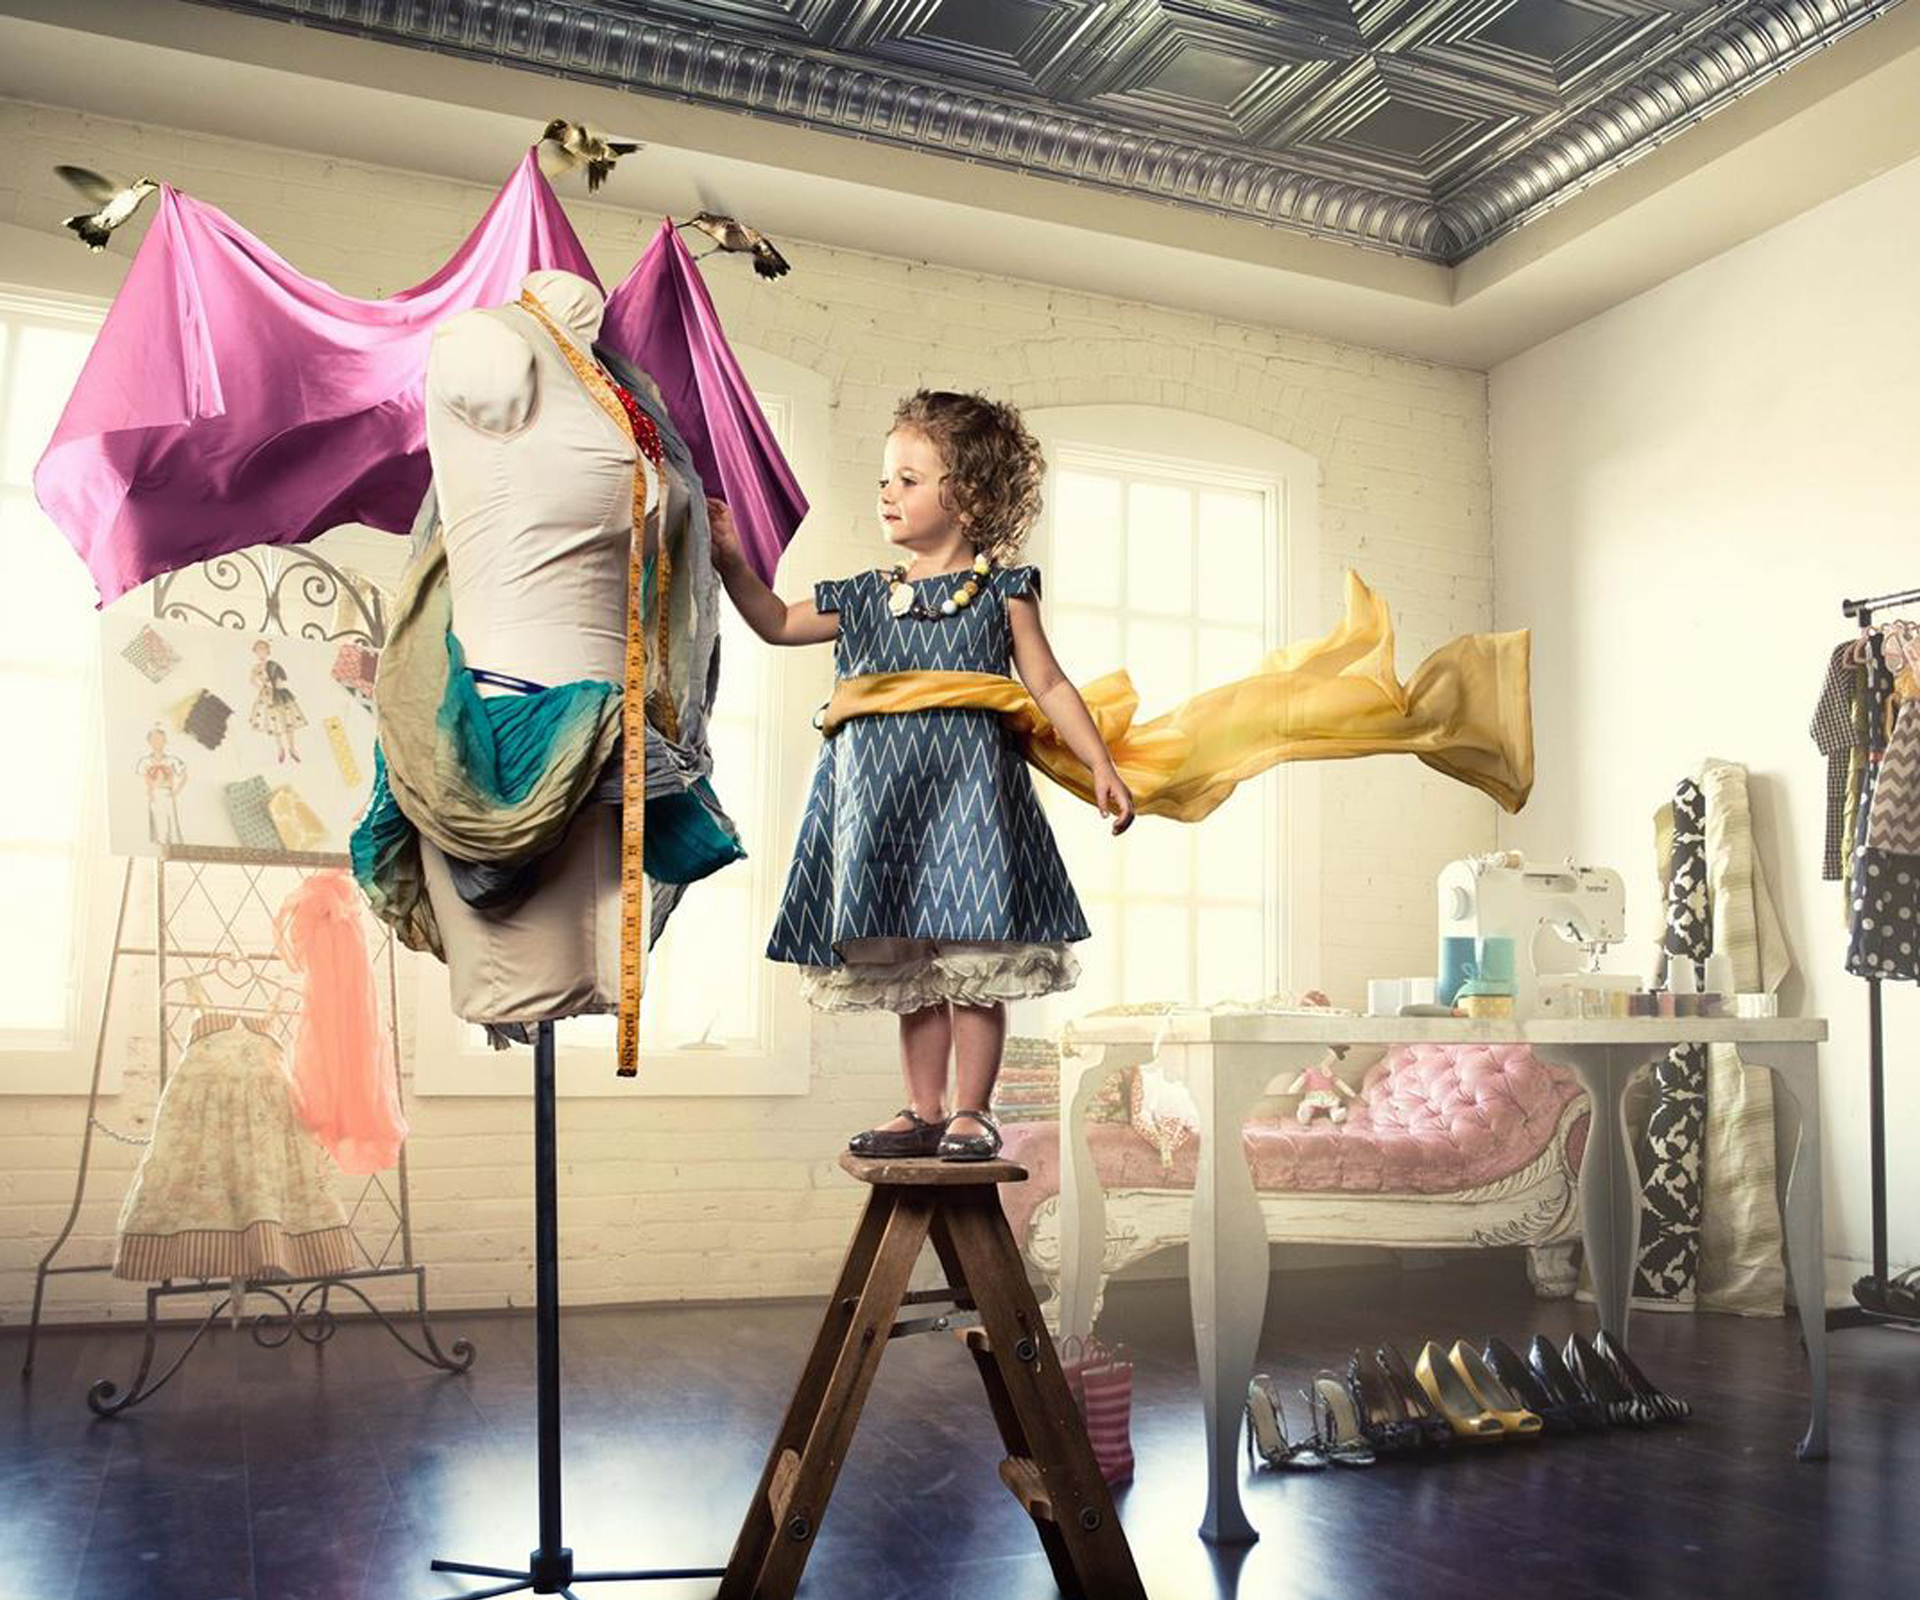 Children battling cancer live out dreams in beautiful photoshoot